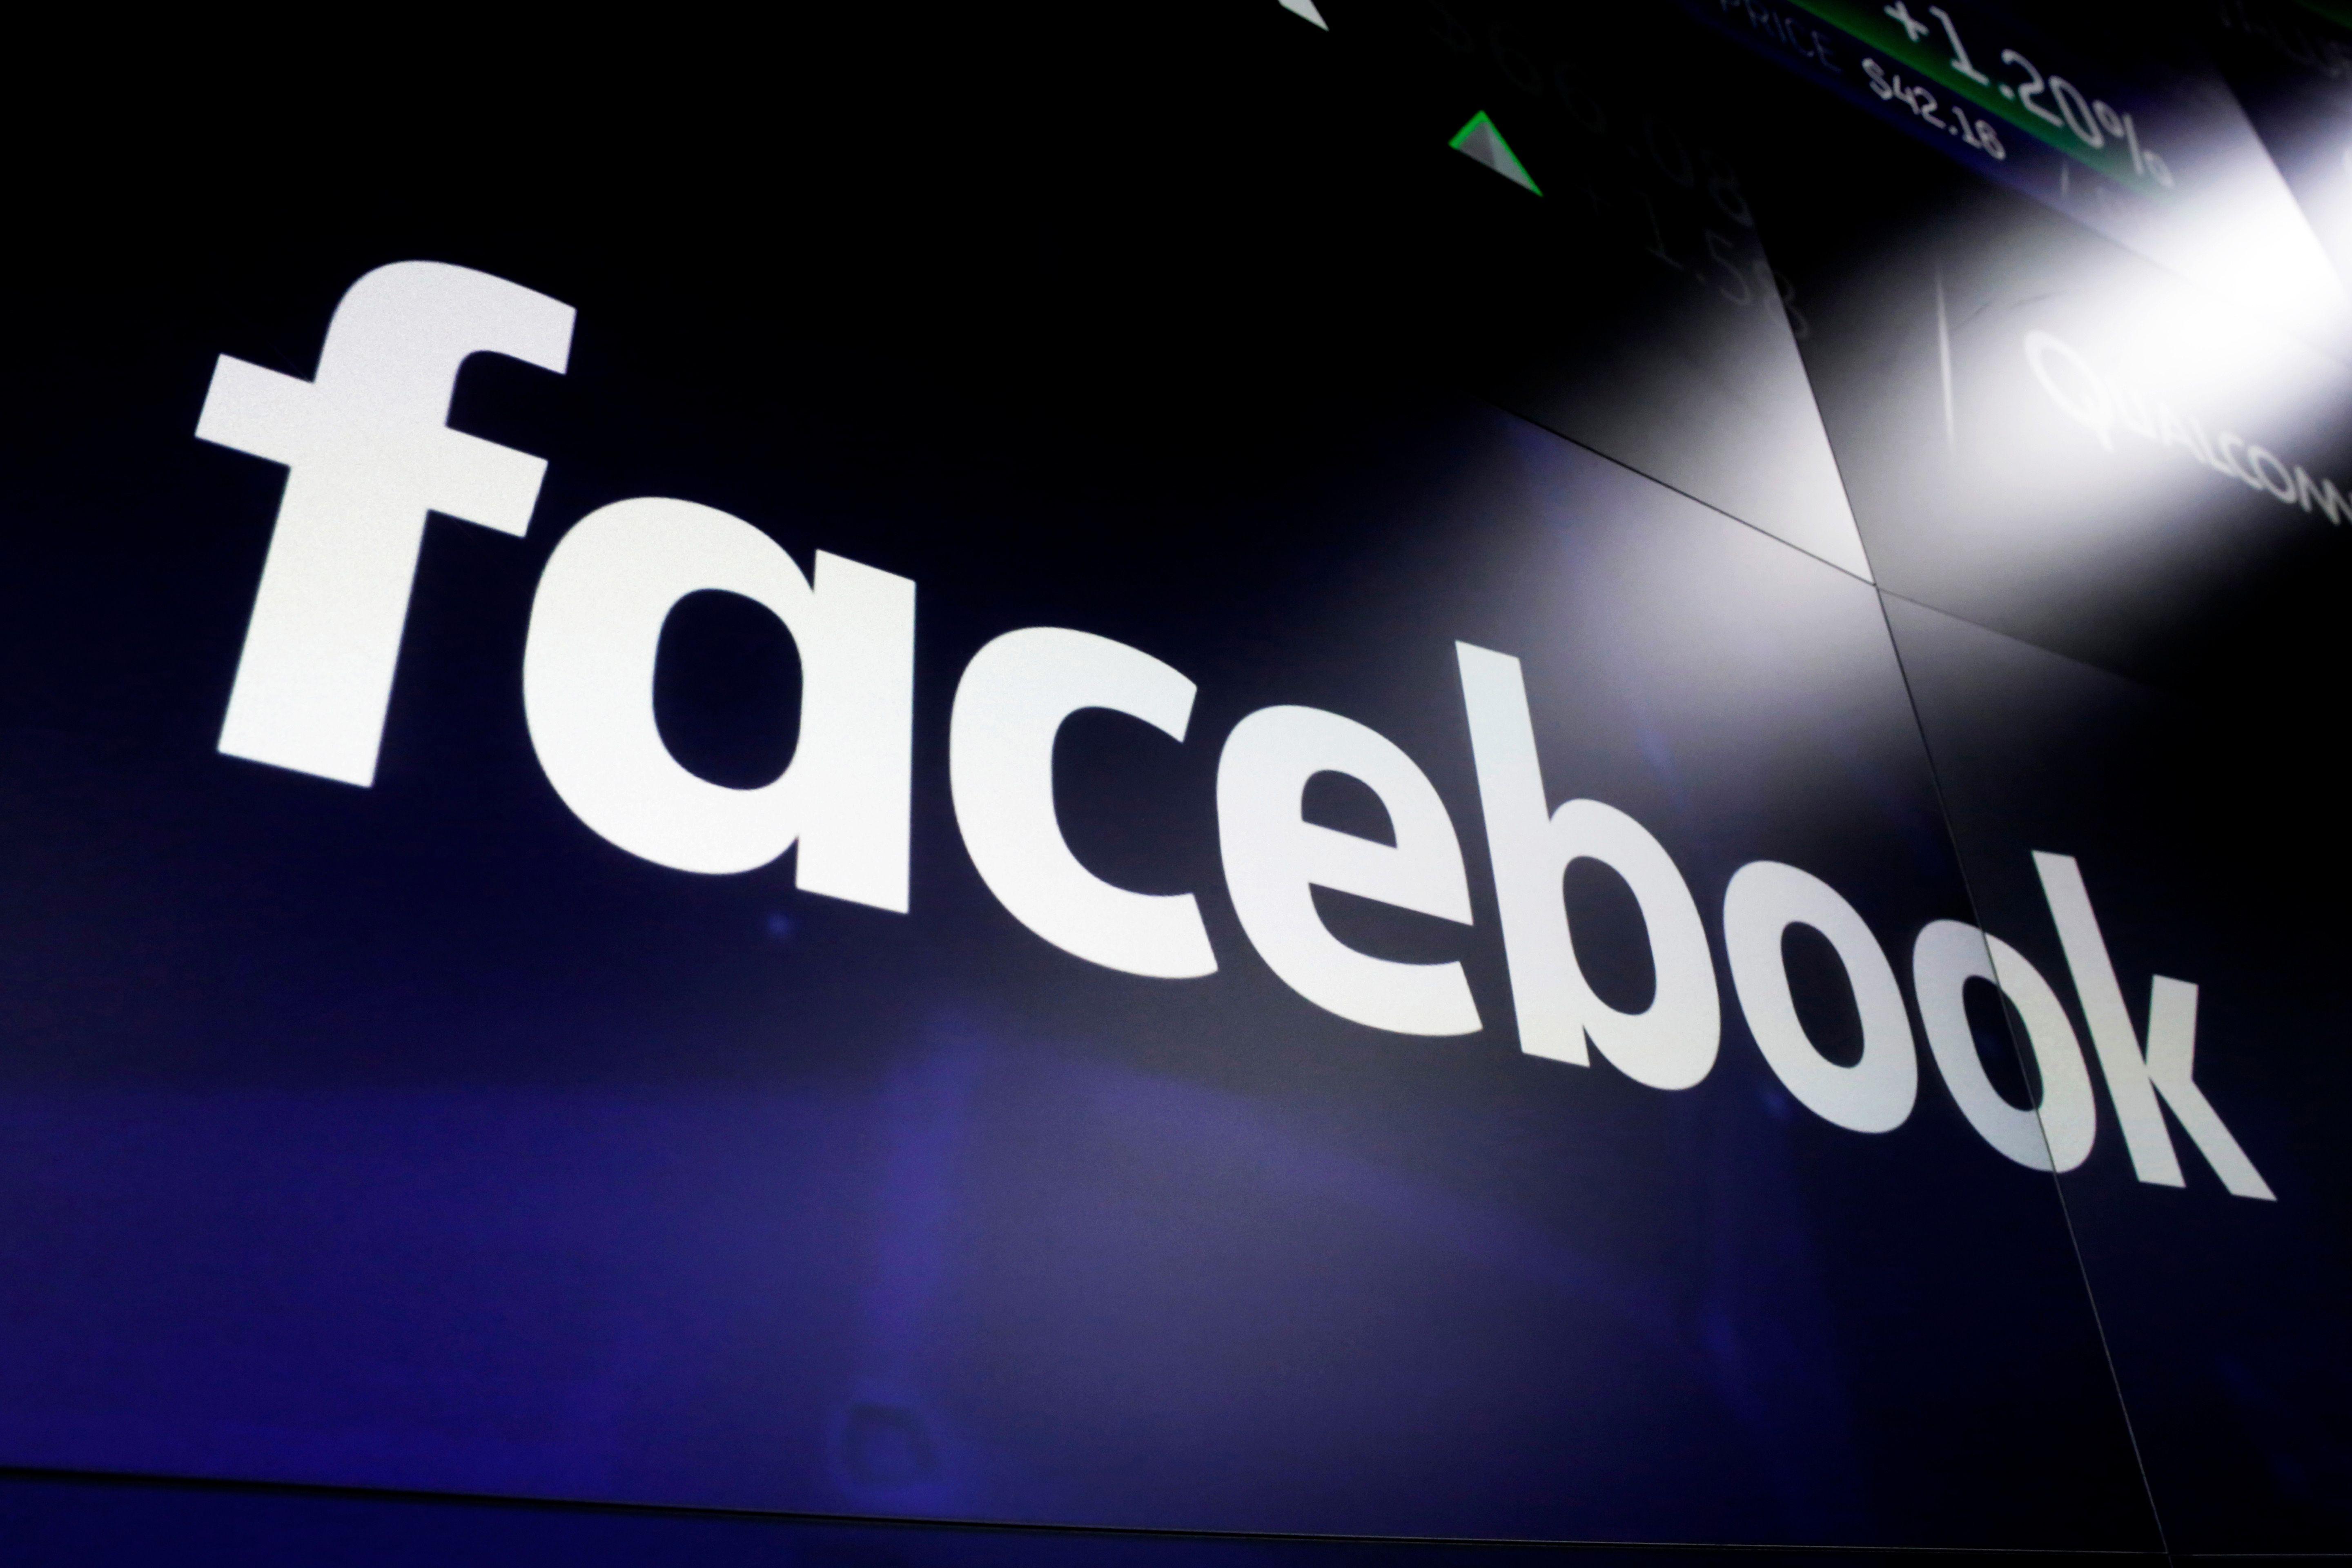 Hispanic Logo - Strategists raise alarms about Facebook delays in approving Hispanic